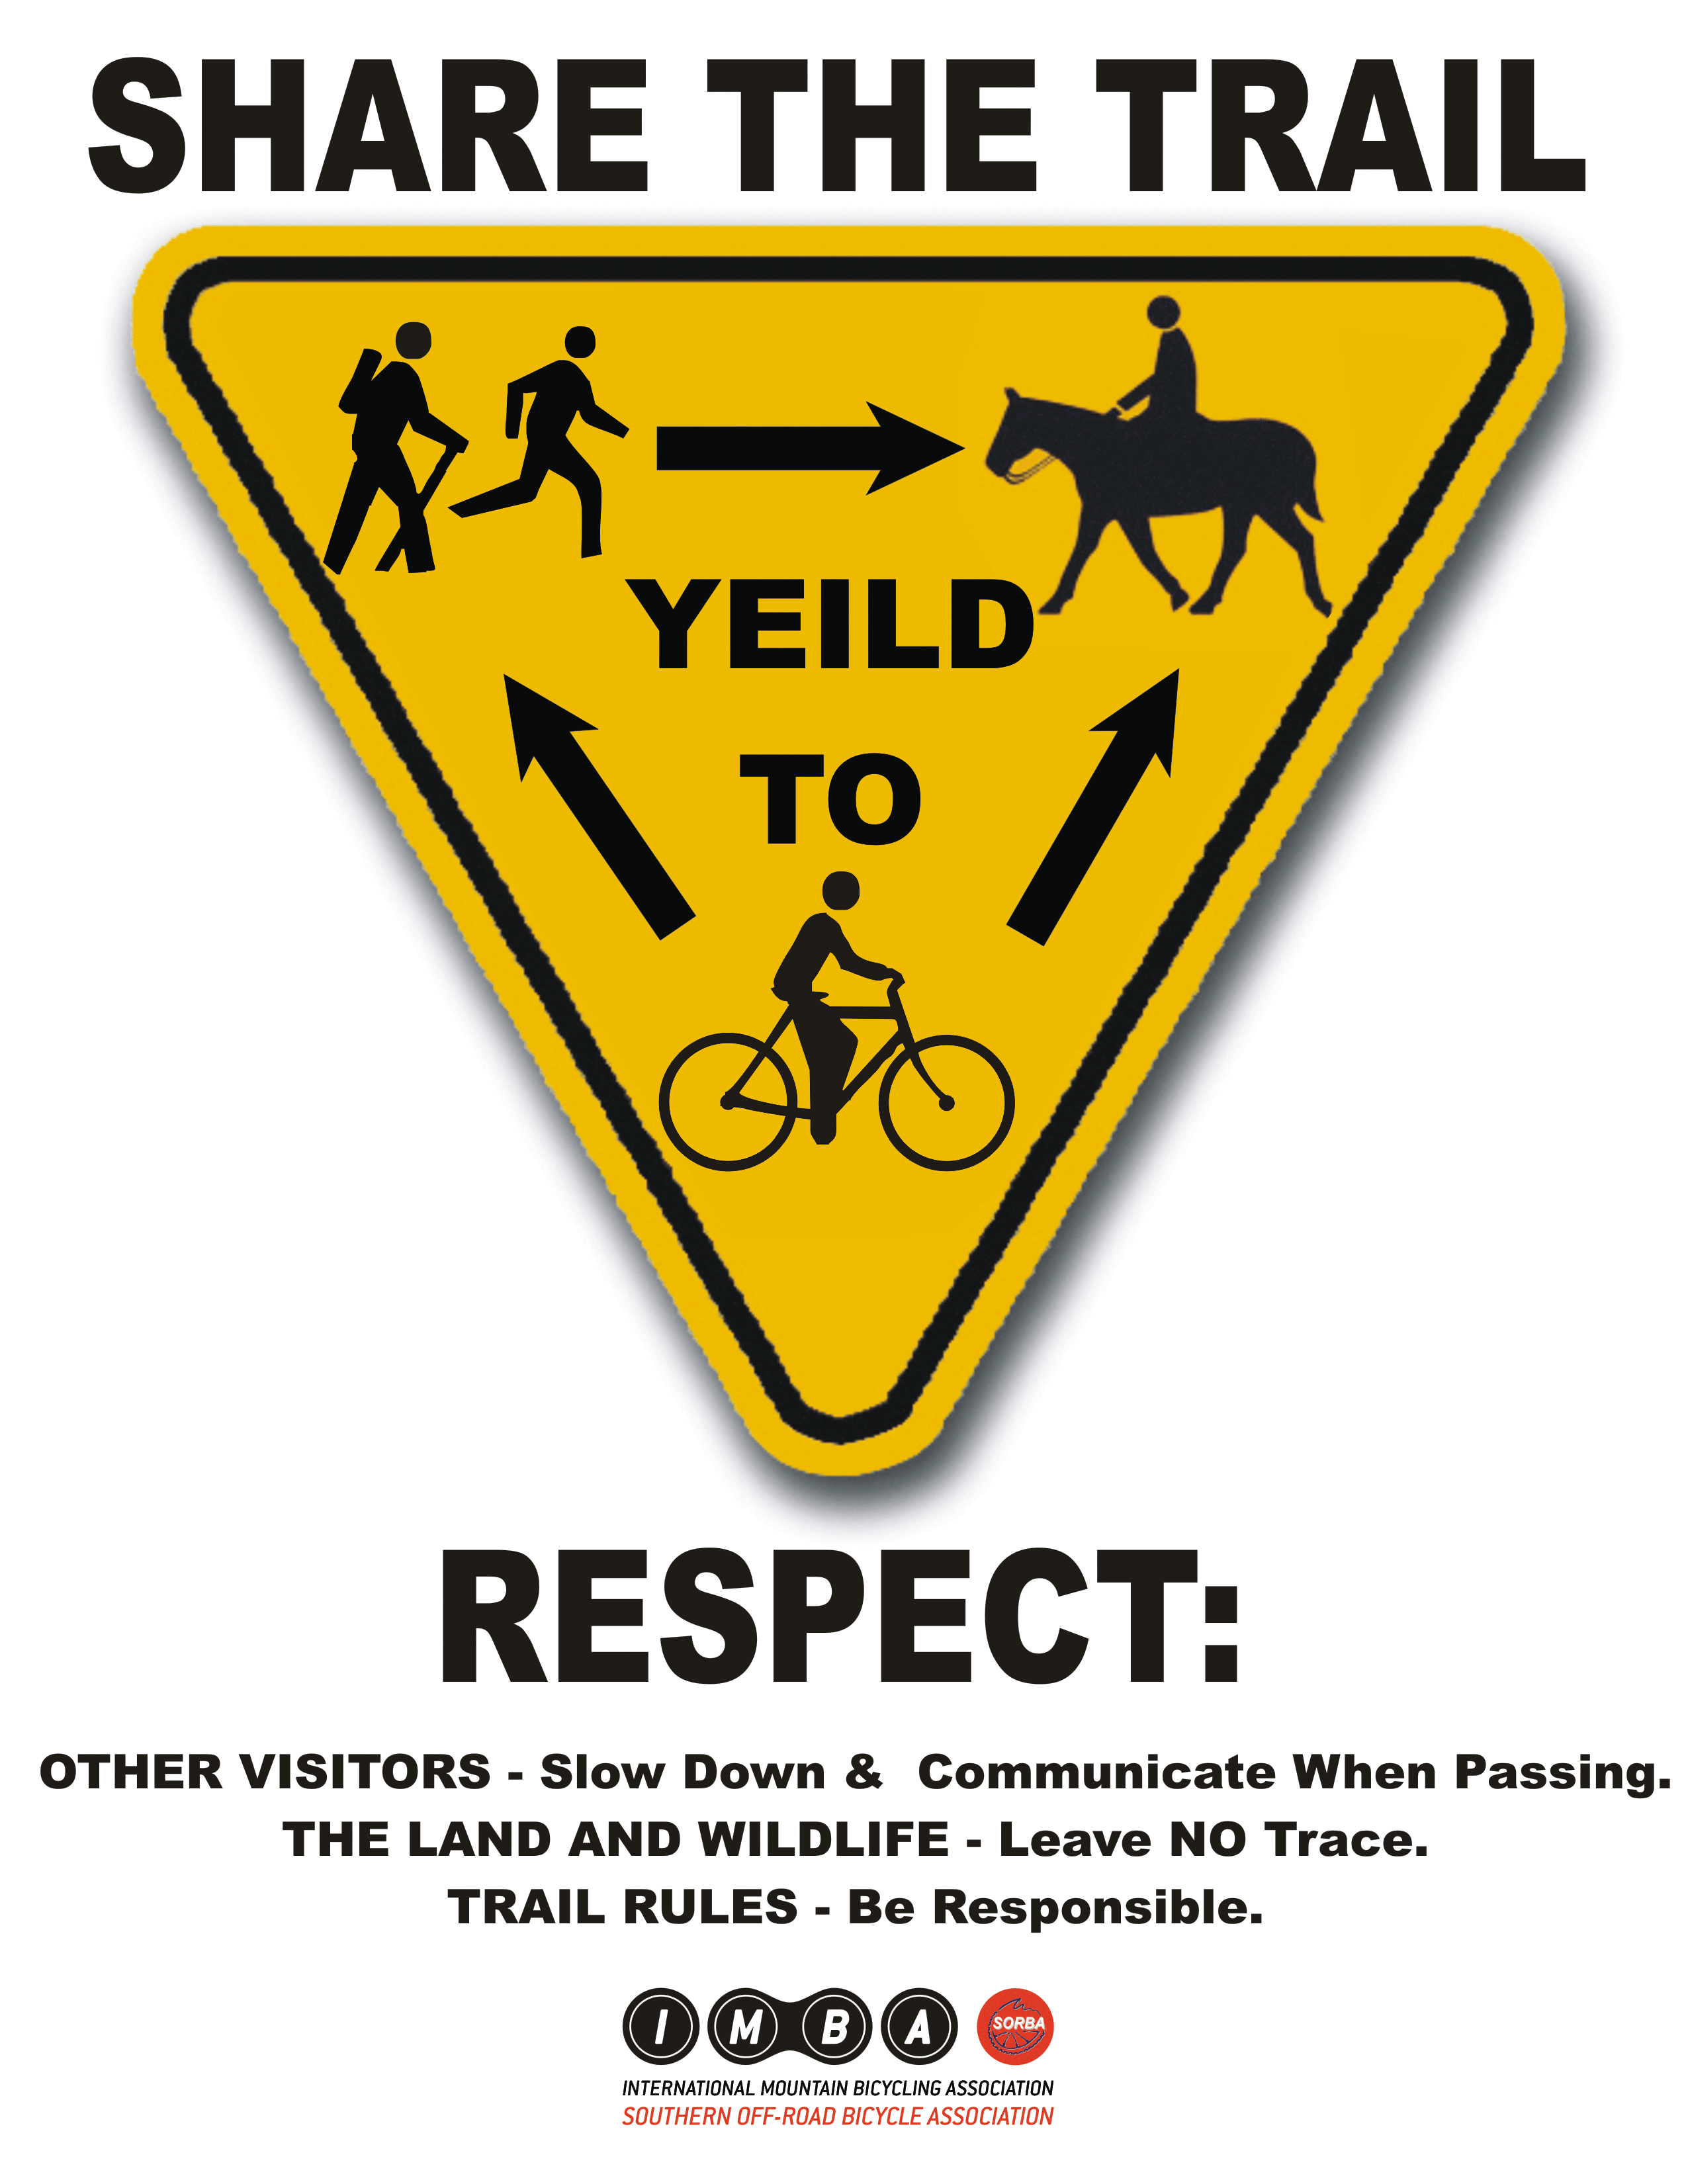 I. Introduction to Trail Etiquette